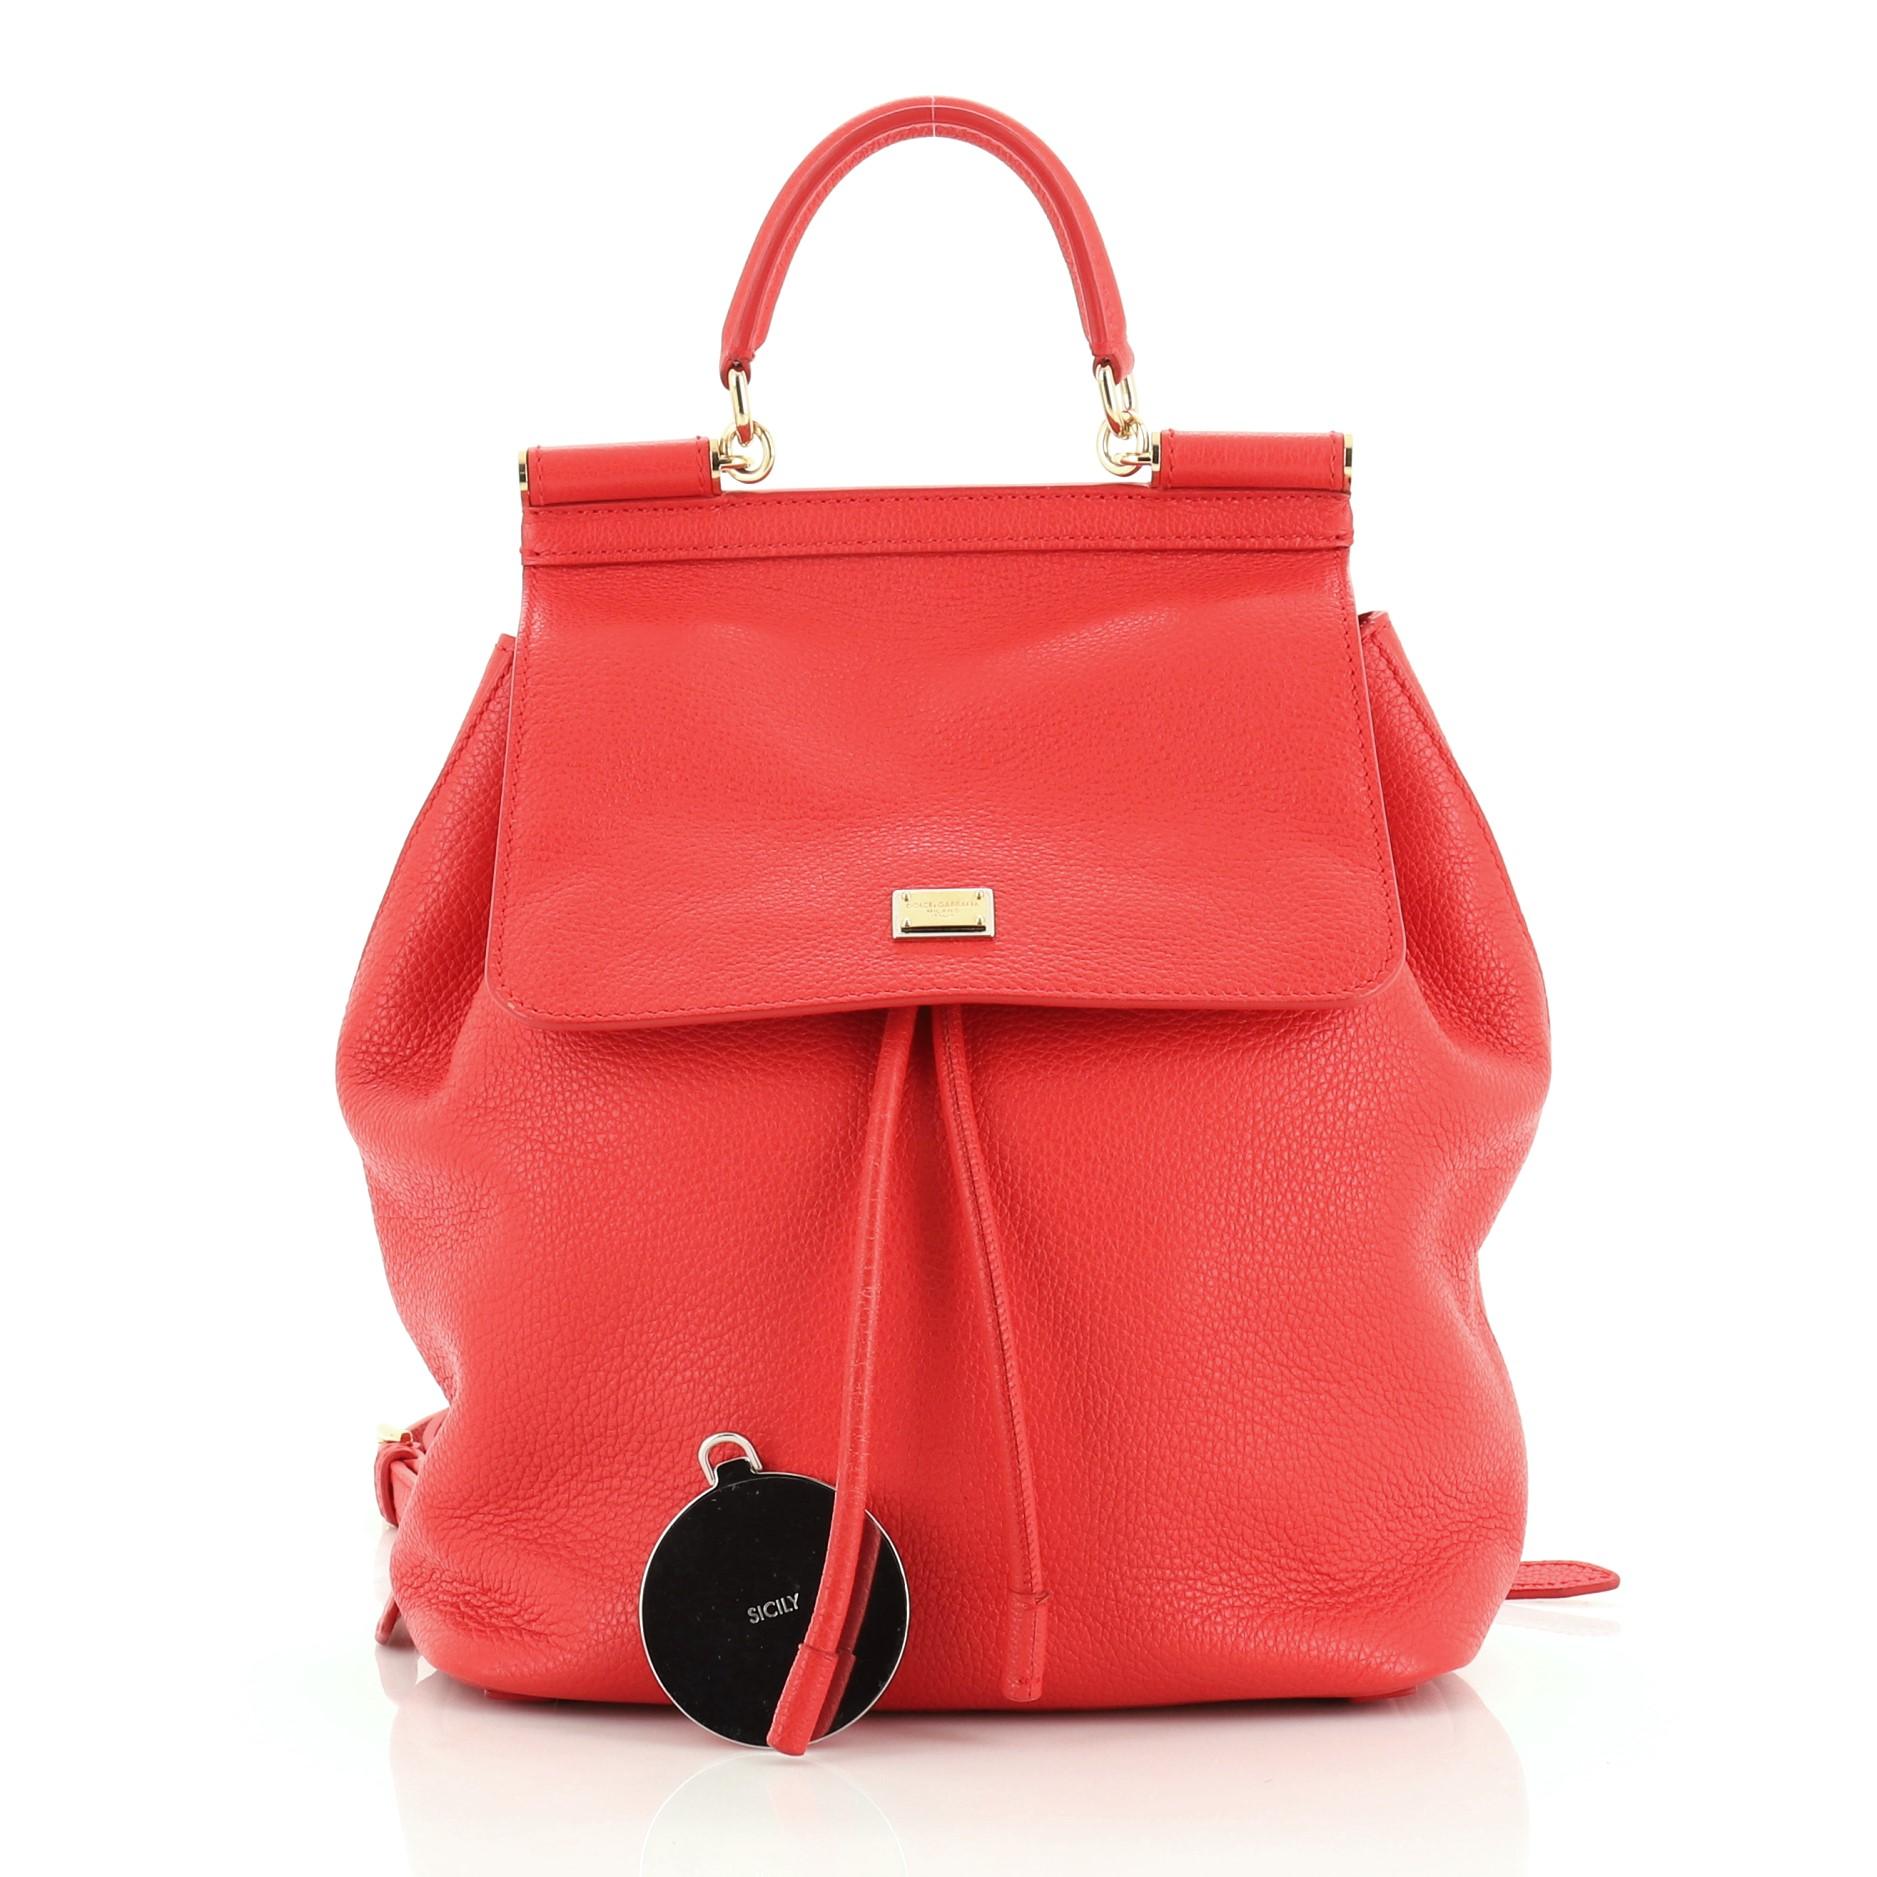 This Dolce & Gabbana Miss Sicily Backpack Leather Mini, crafted from red leather, features leather top handle, adjustable shoulder straps, designer plaque, and gold-tone hardware. Its framed top flap with magnetic snap and drawstring closure opens